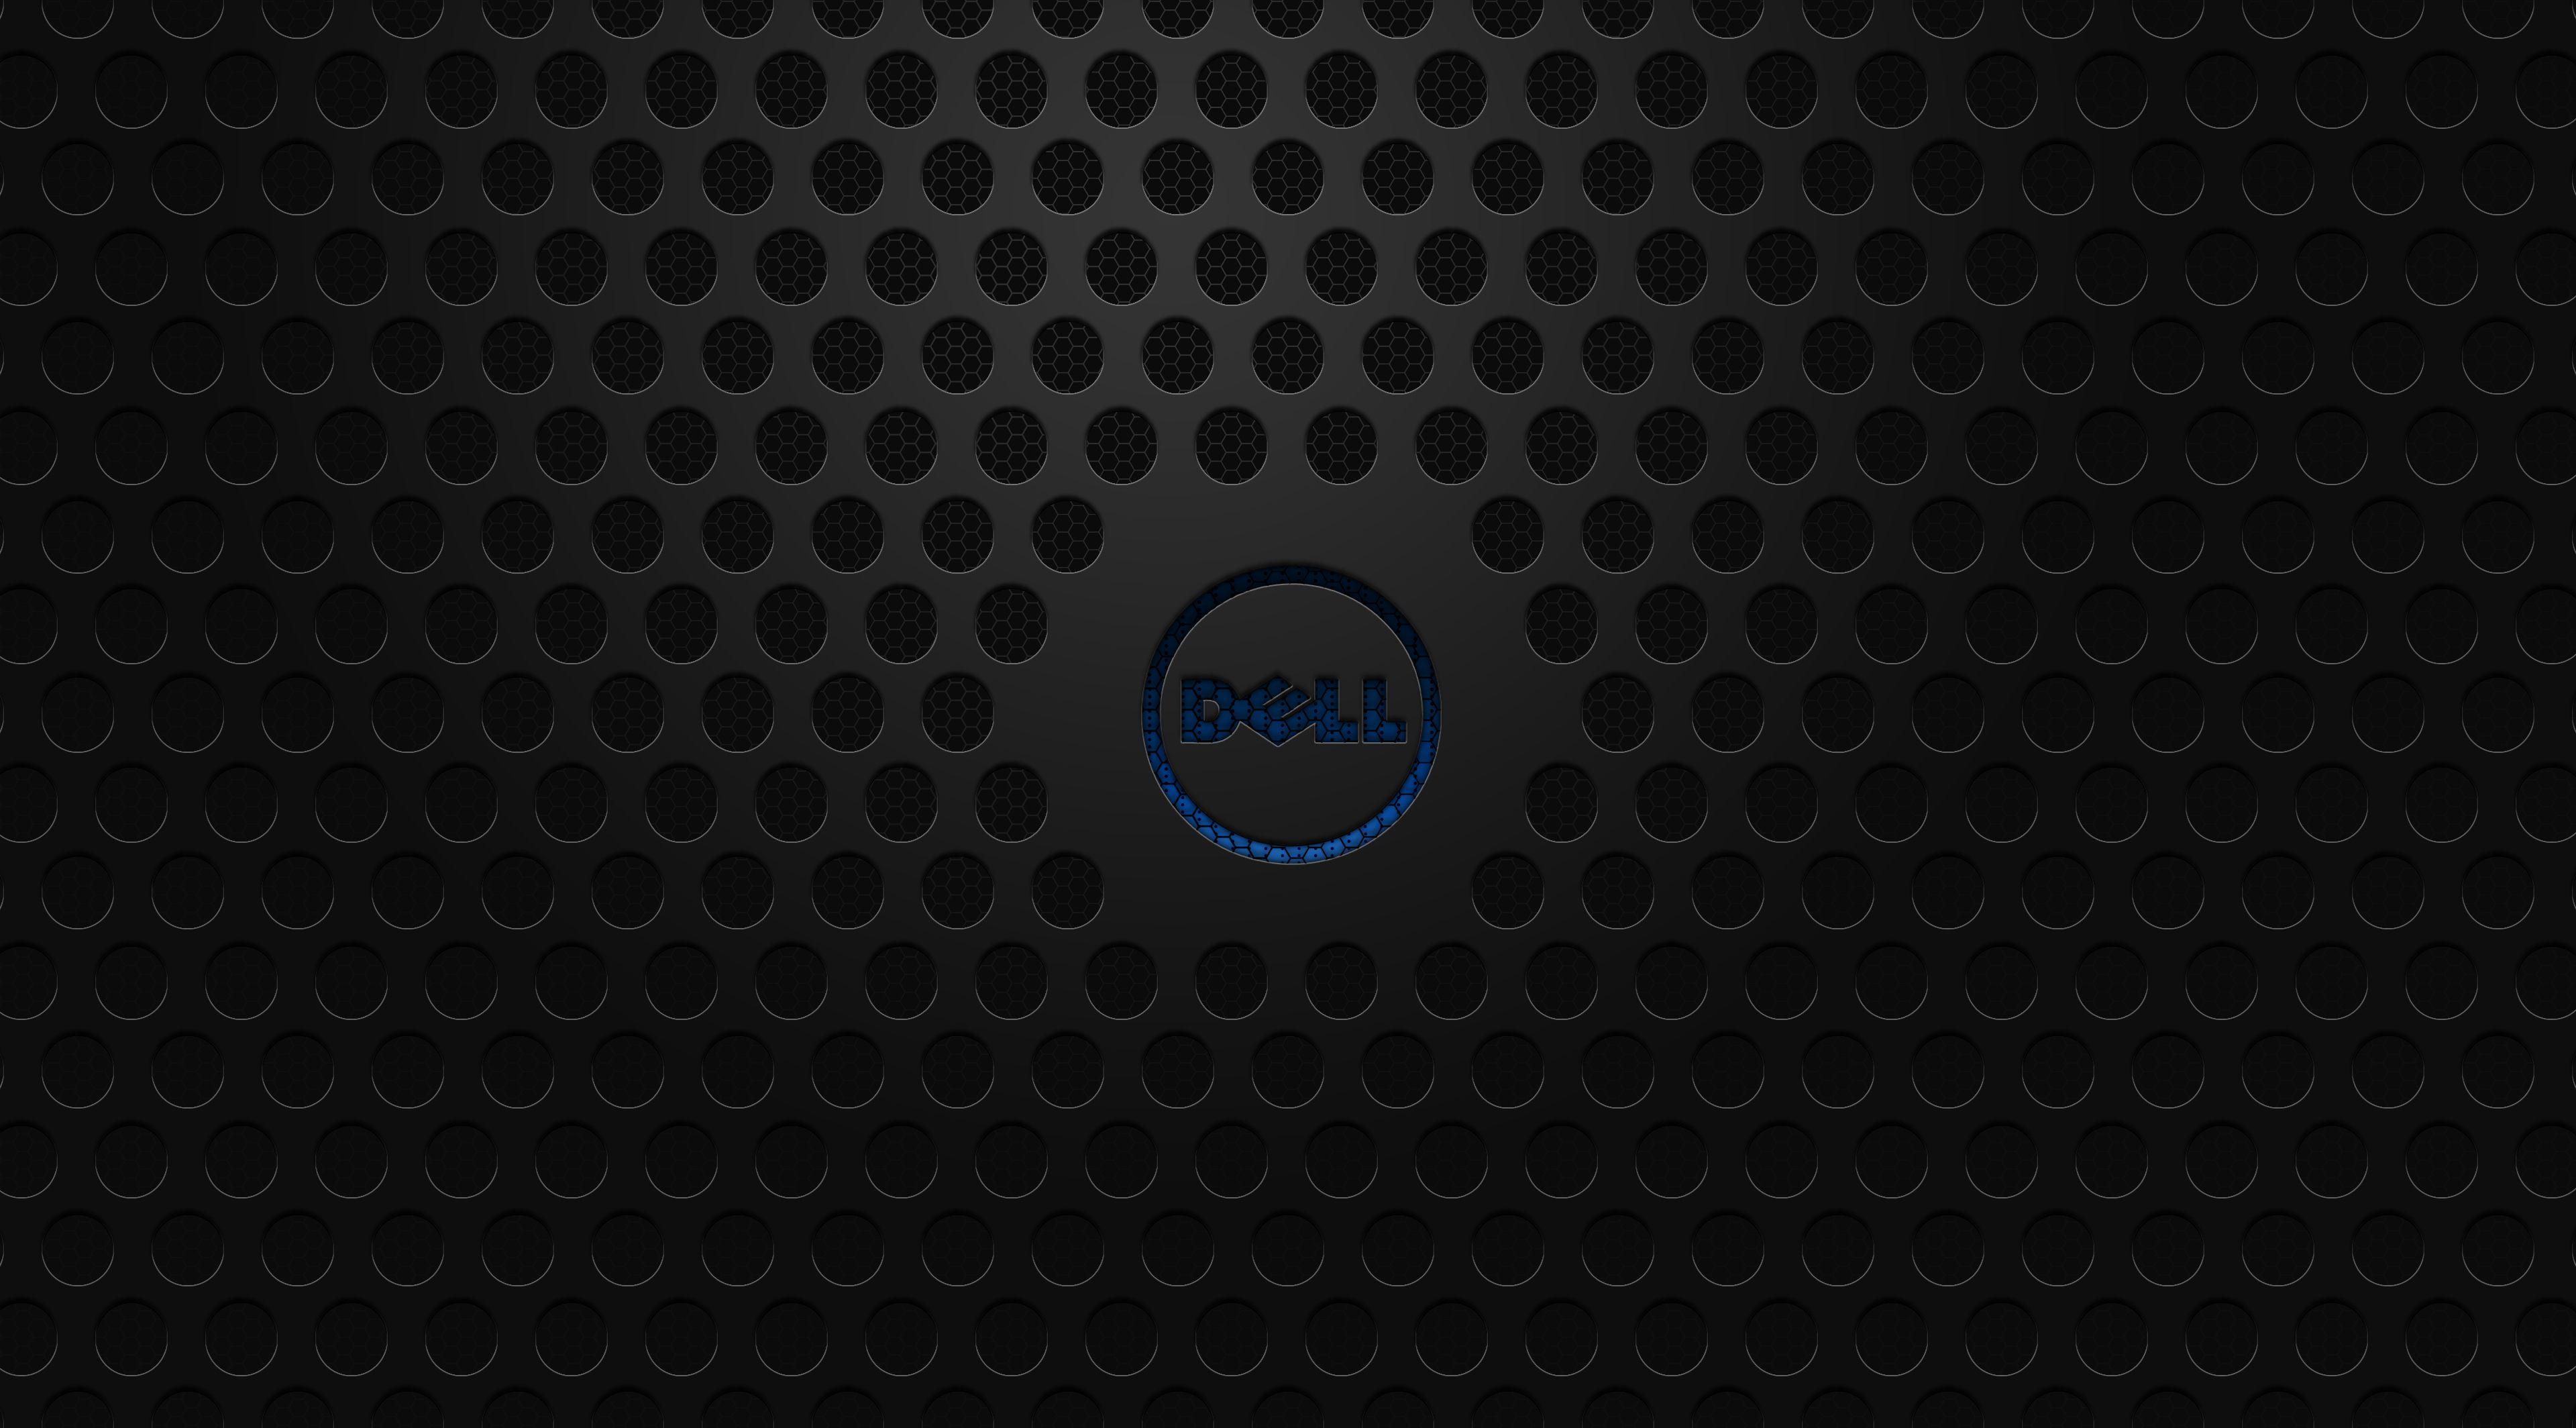 Dell HD Wallpaper and Background